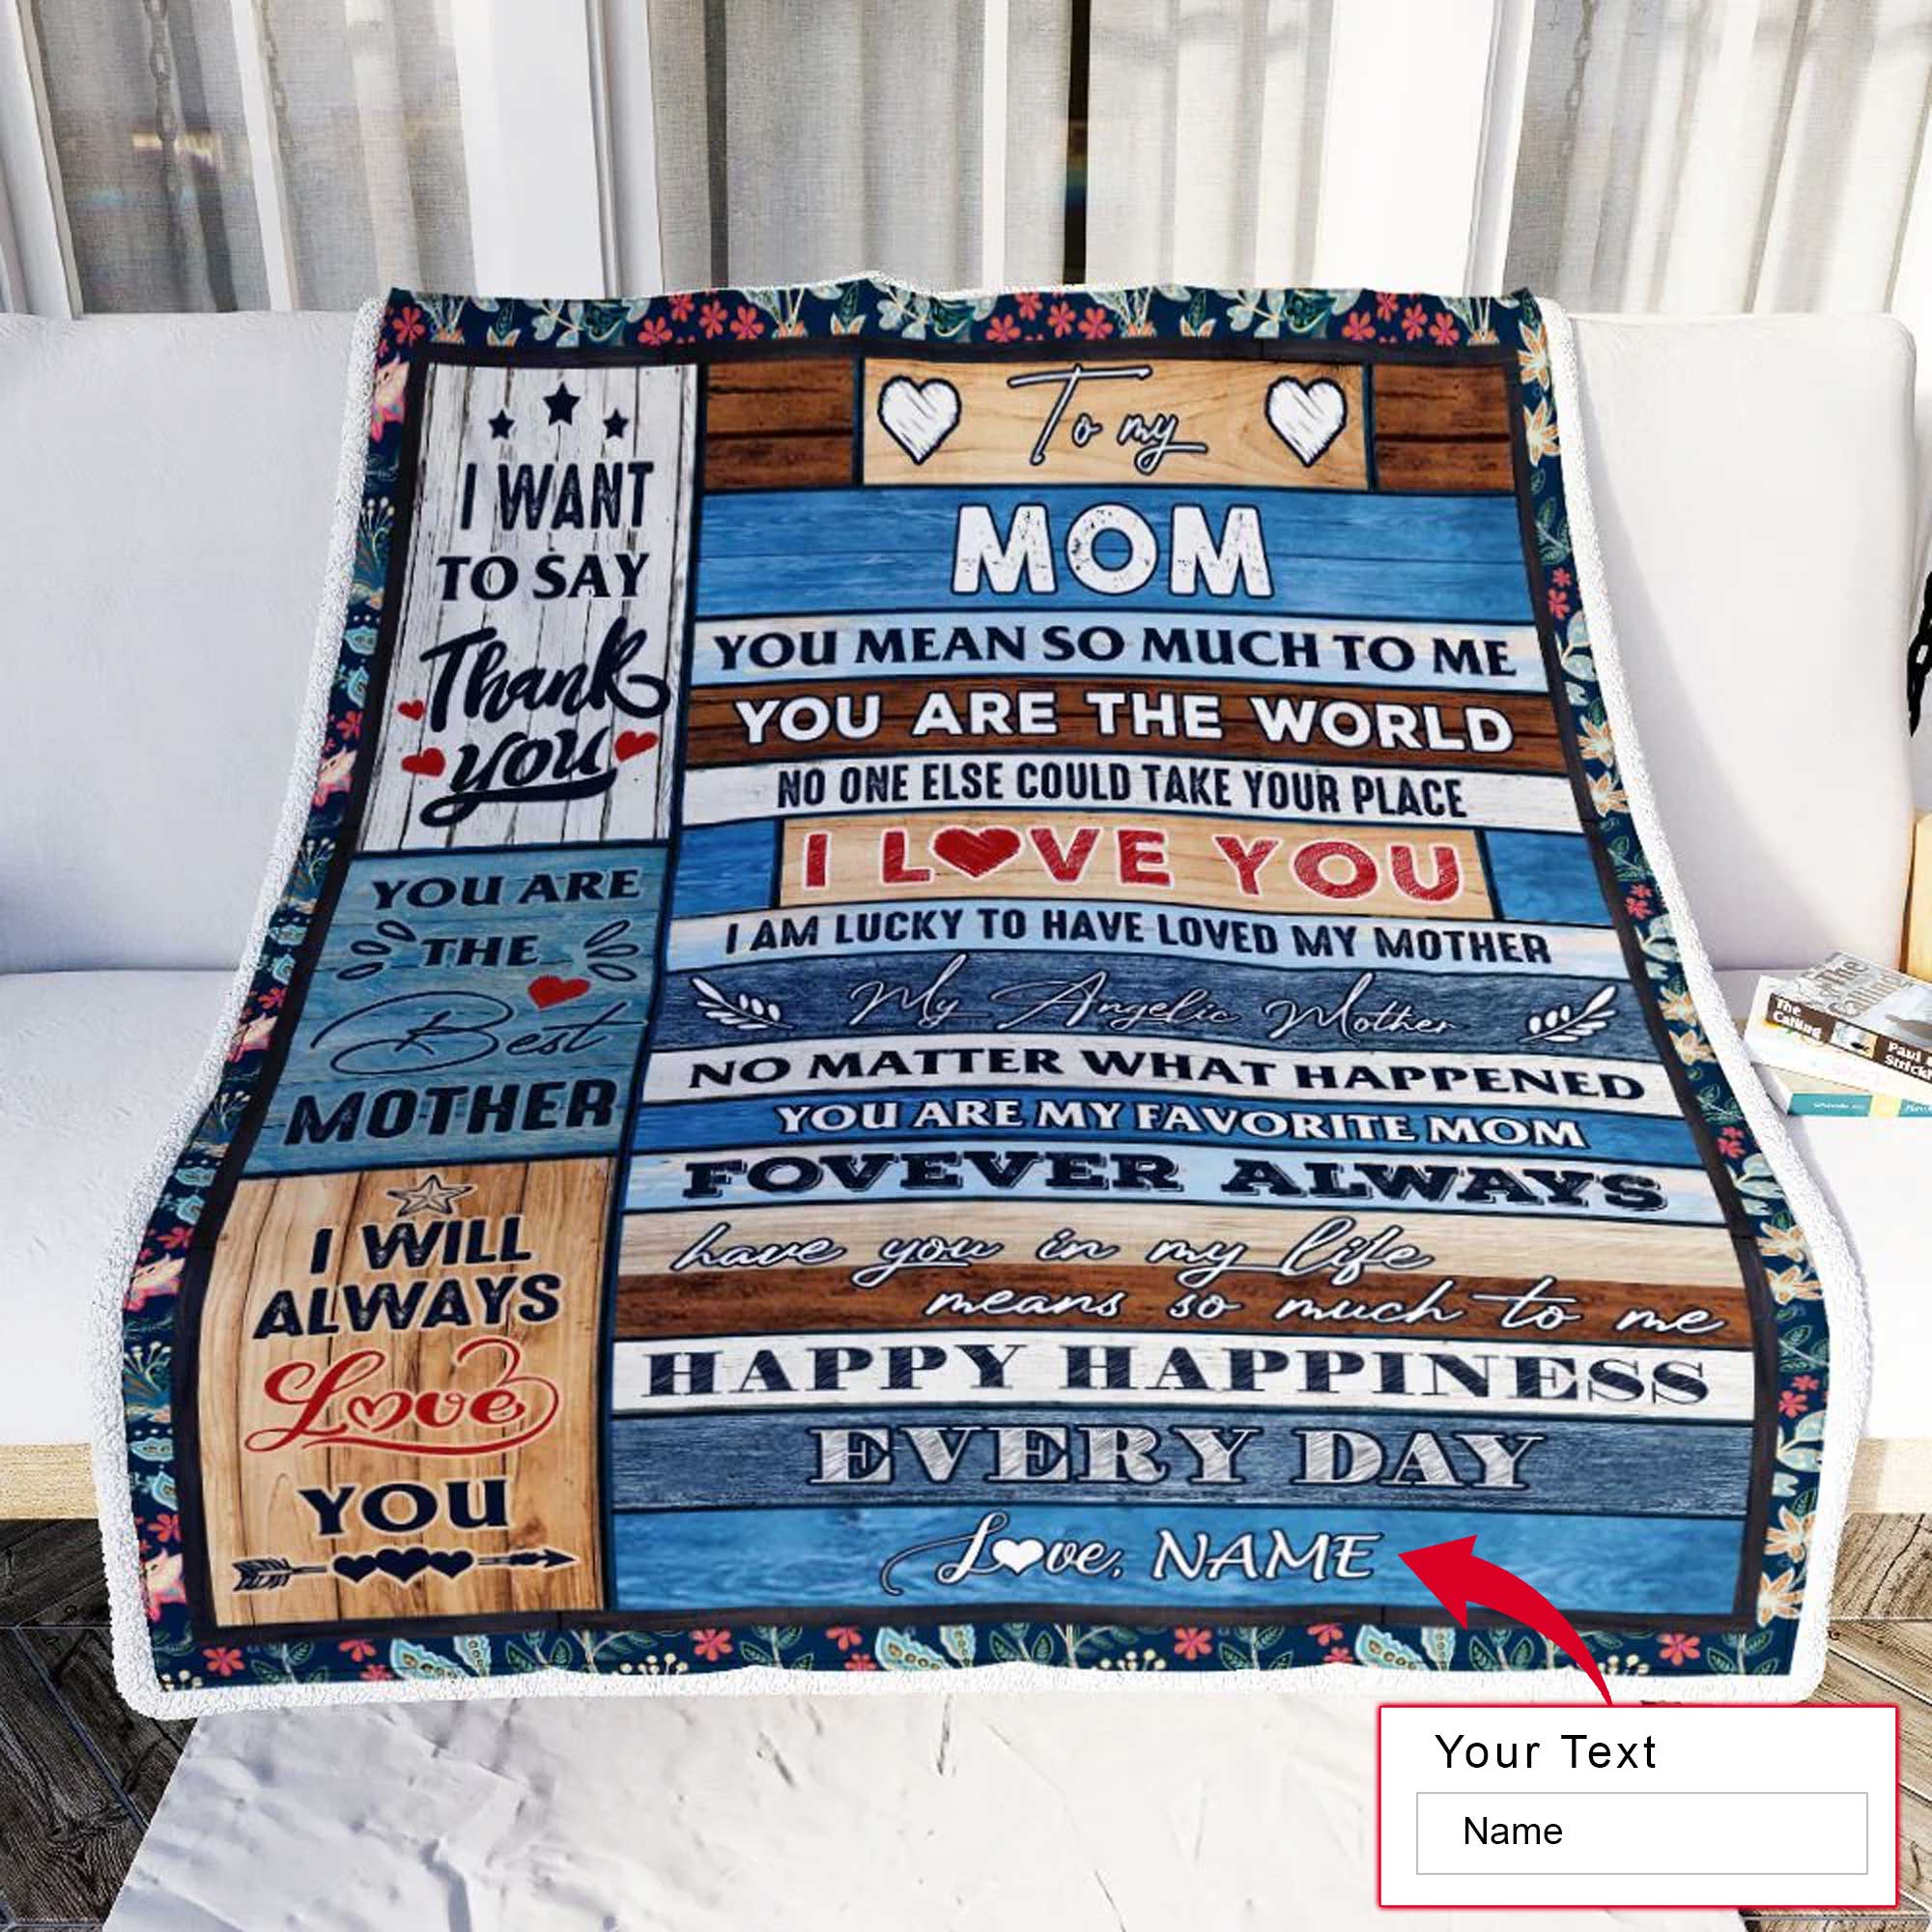 Best Mom Gift Blanket - Gifts for Moms Who Have Everything - Mom